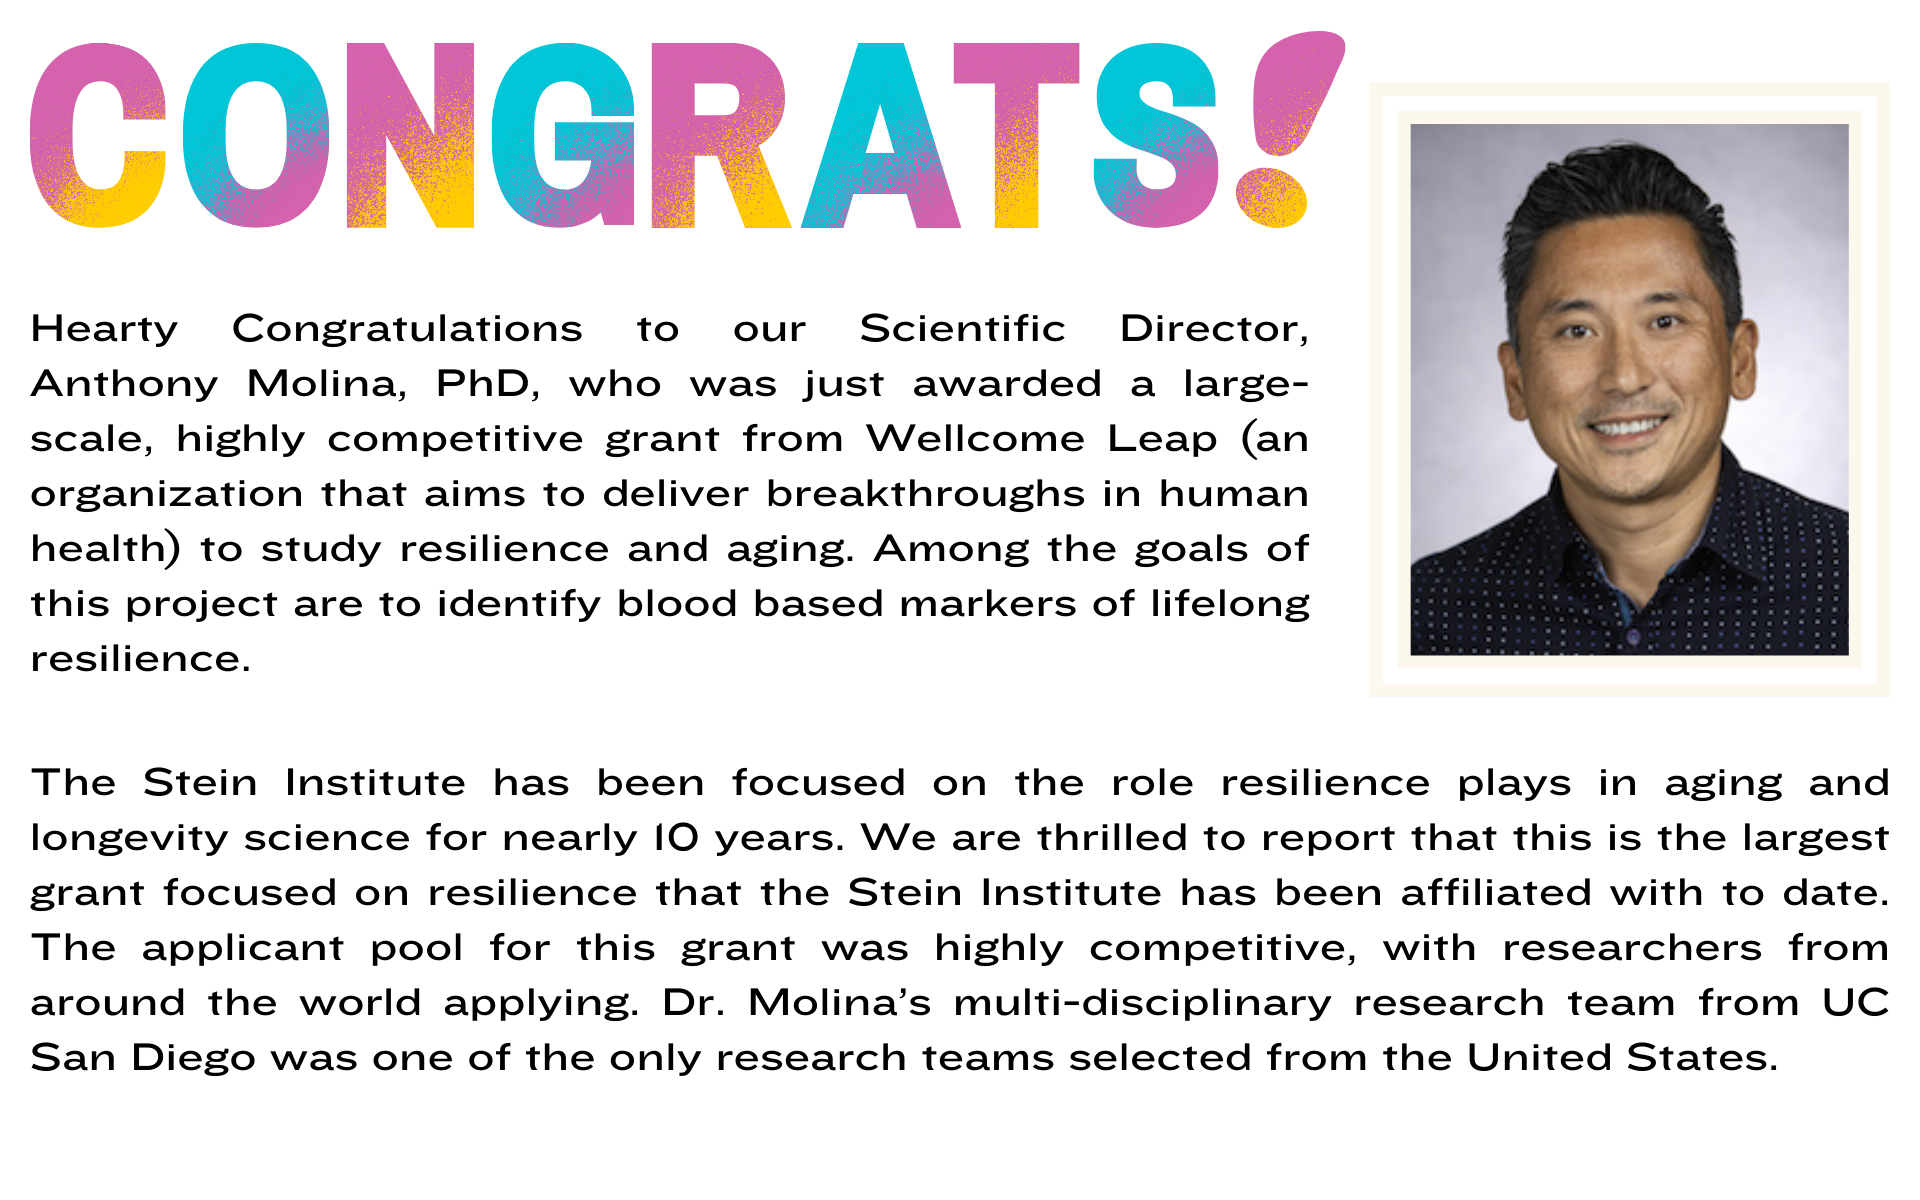 congratulations-to-our-interim-scientific-director-Dr.-Anthony-Molina-for-his-recent-10-million-dollar-grant-to-study-resilience-and-aging.-The-stein-Institute-has-long-focused-on-the-role-that-re.png